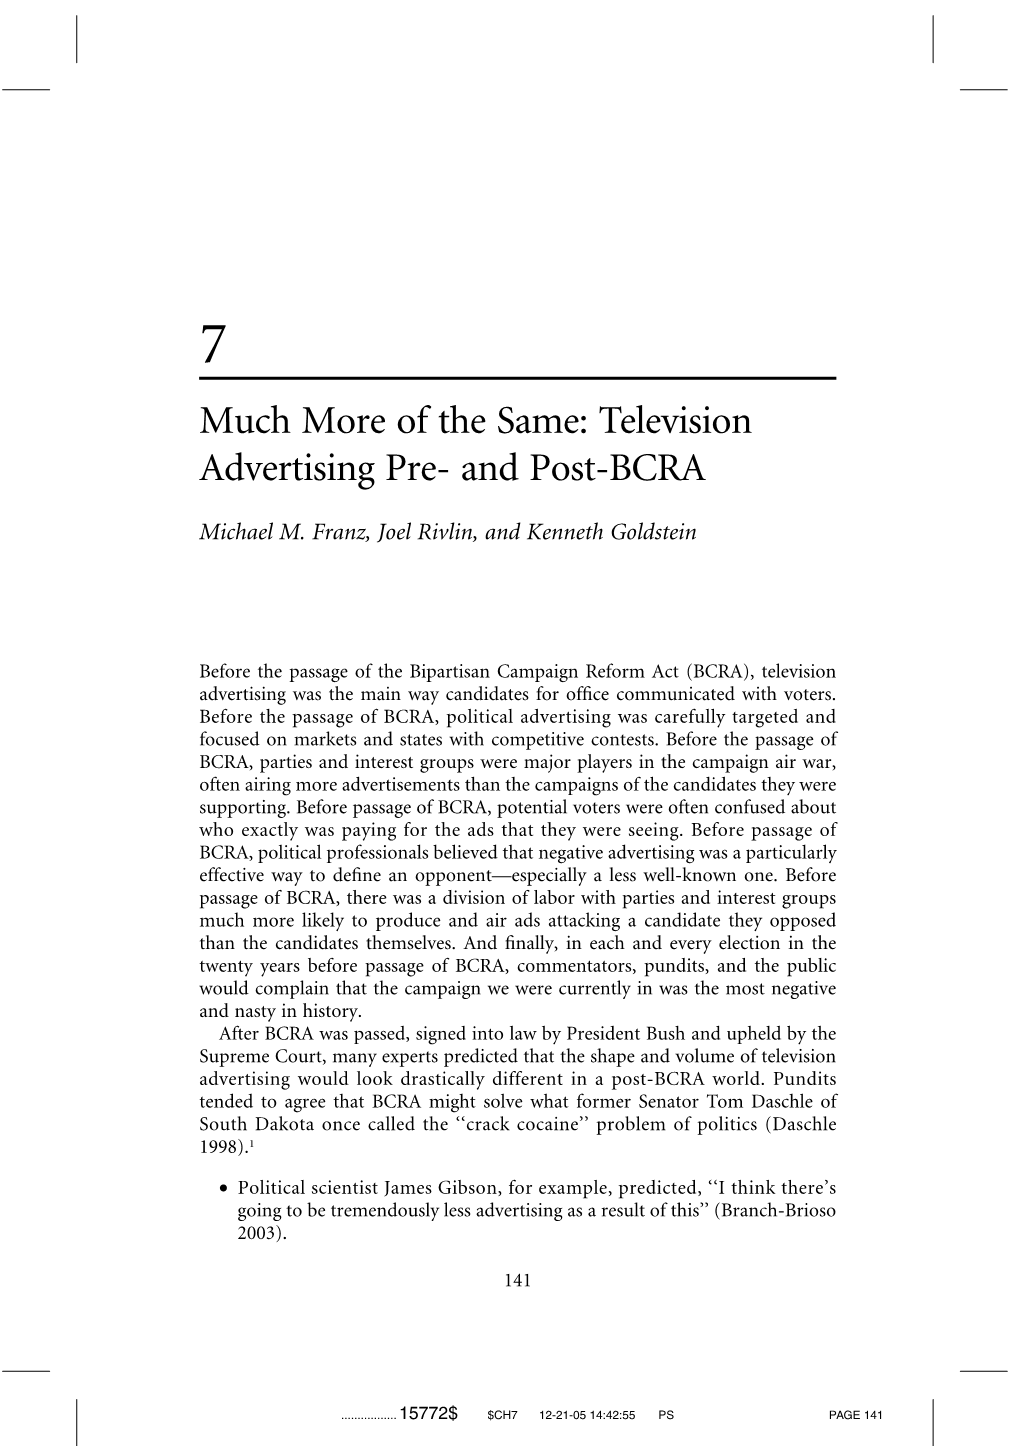 Television Advertising Pre- and Post-BCRA